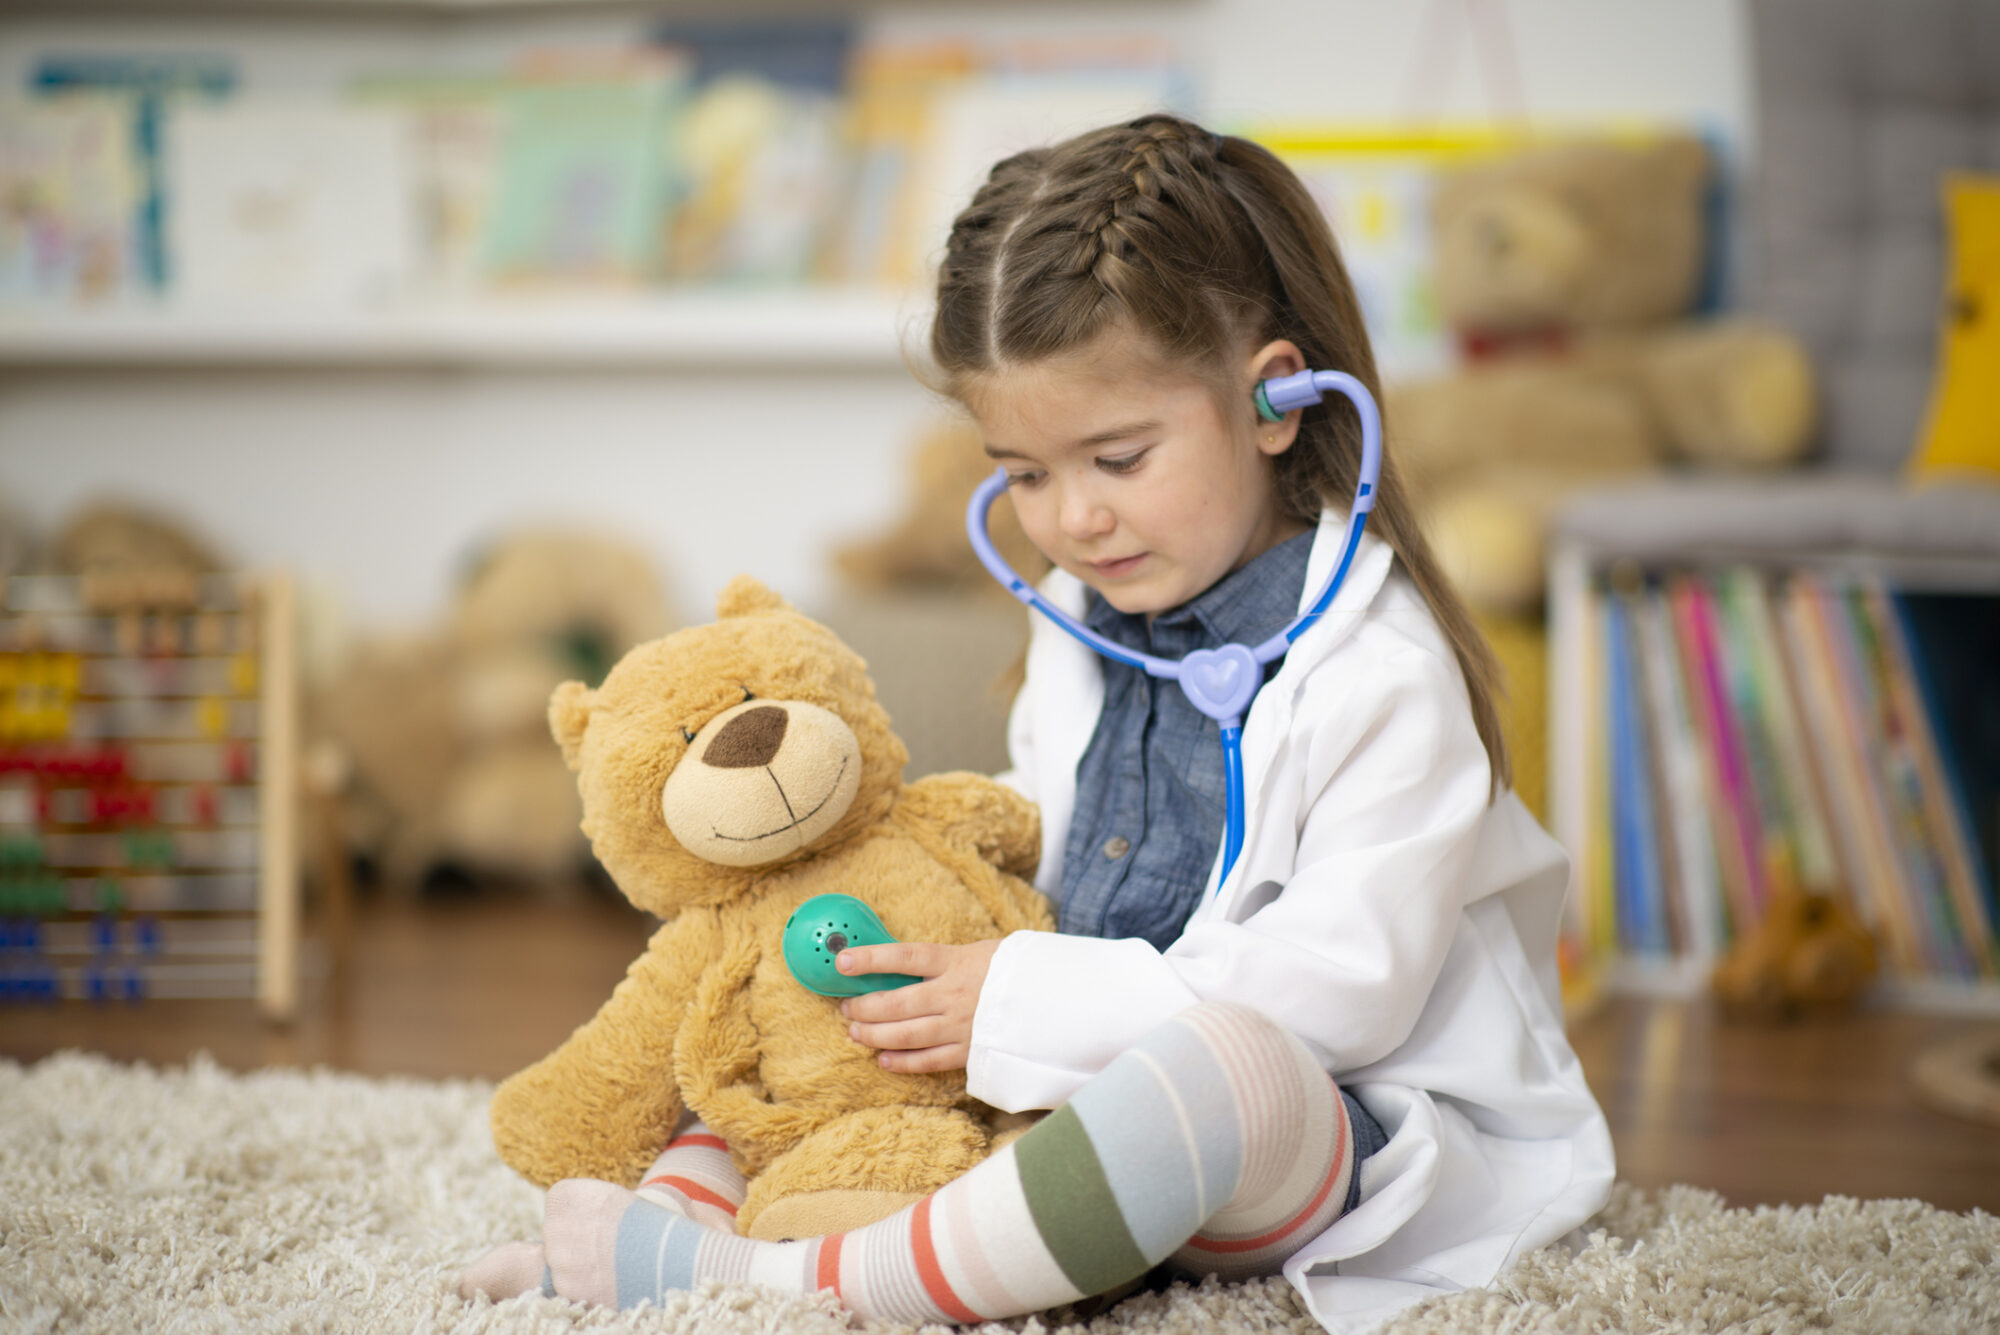 Girl playing doctor with teddy bear.